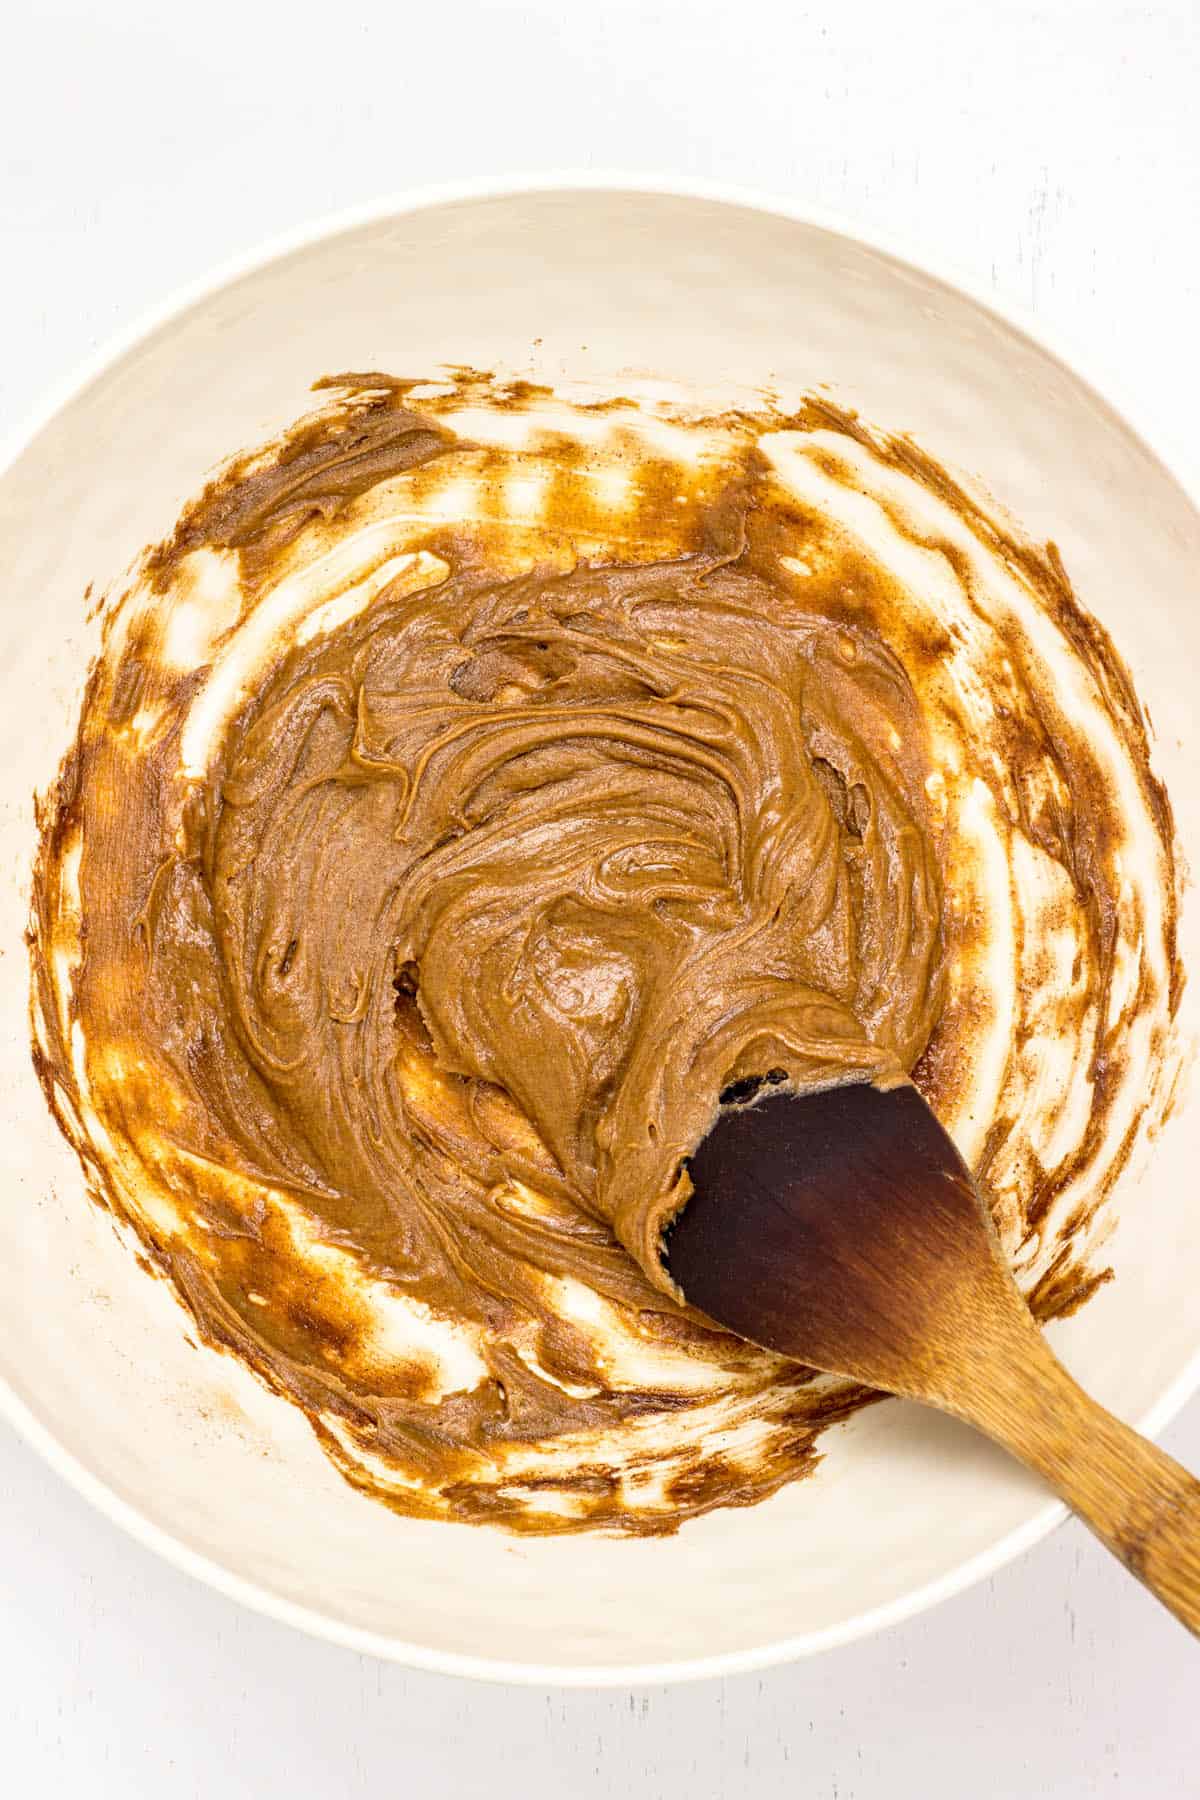 Peanut butter and maple syrup mixed together in a large white bowl.